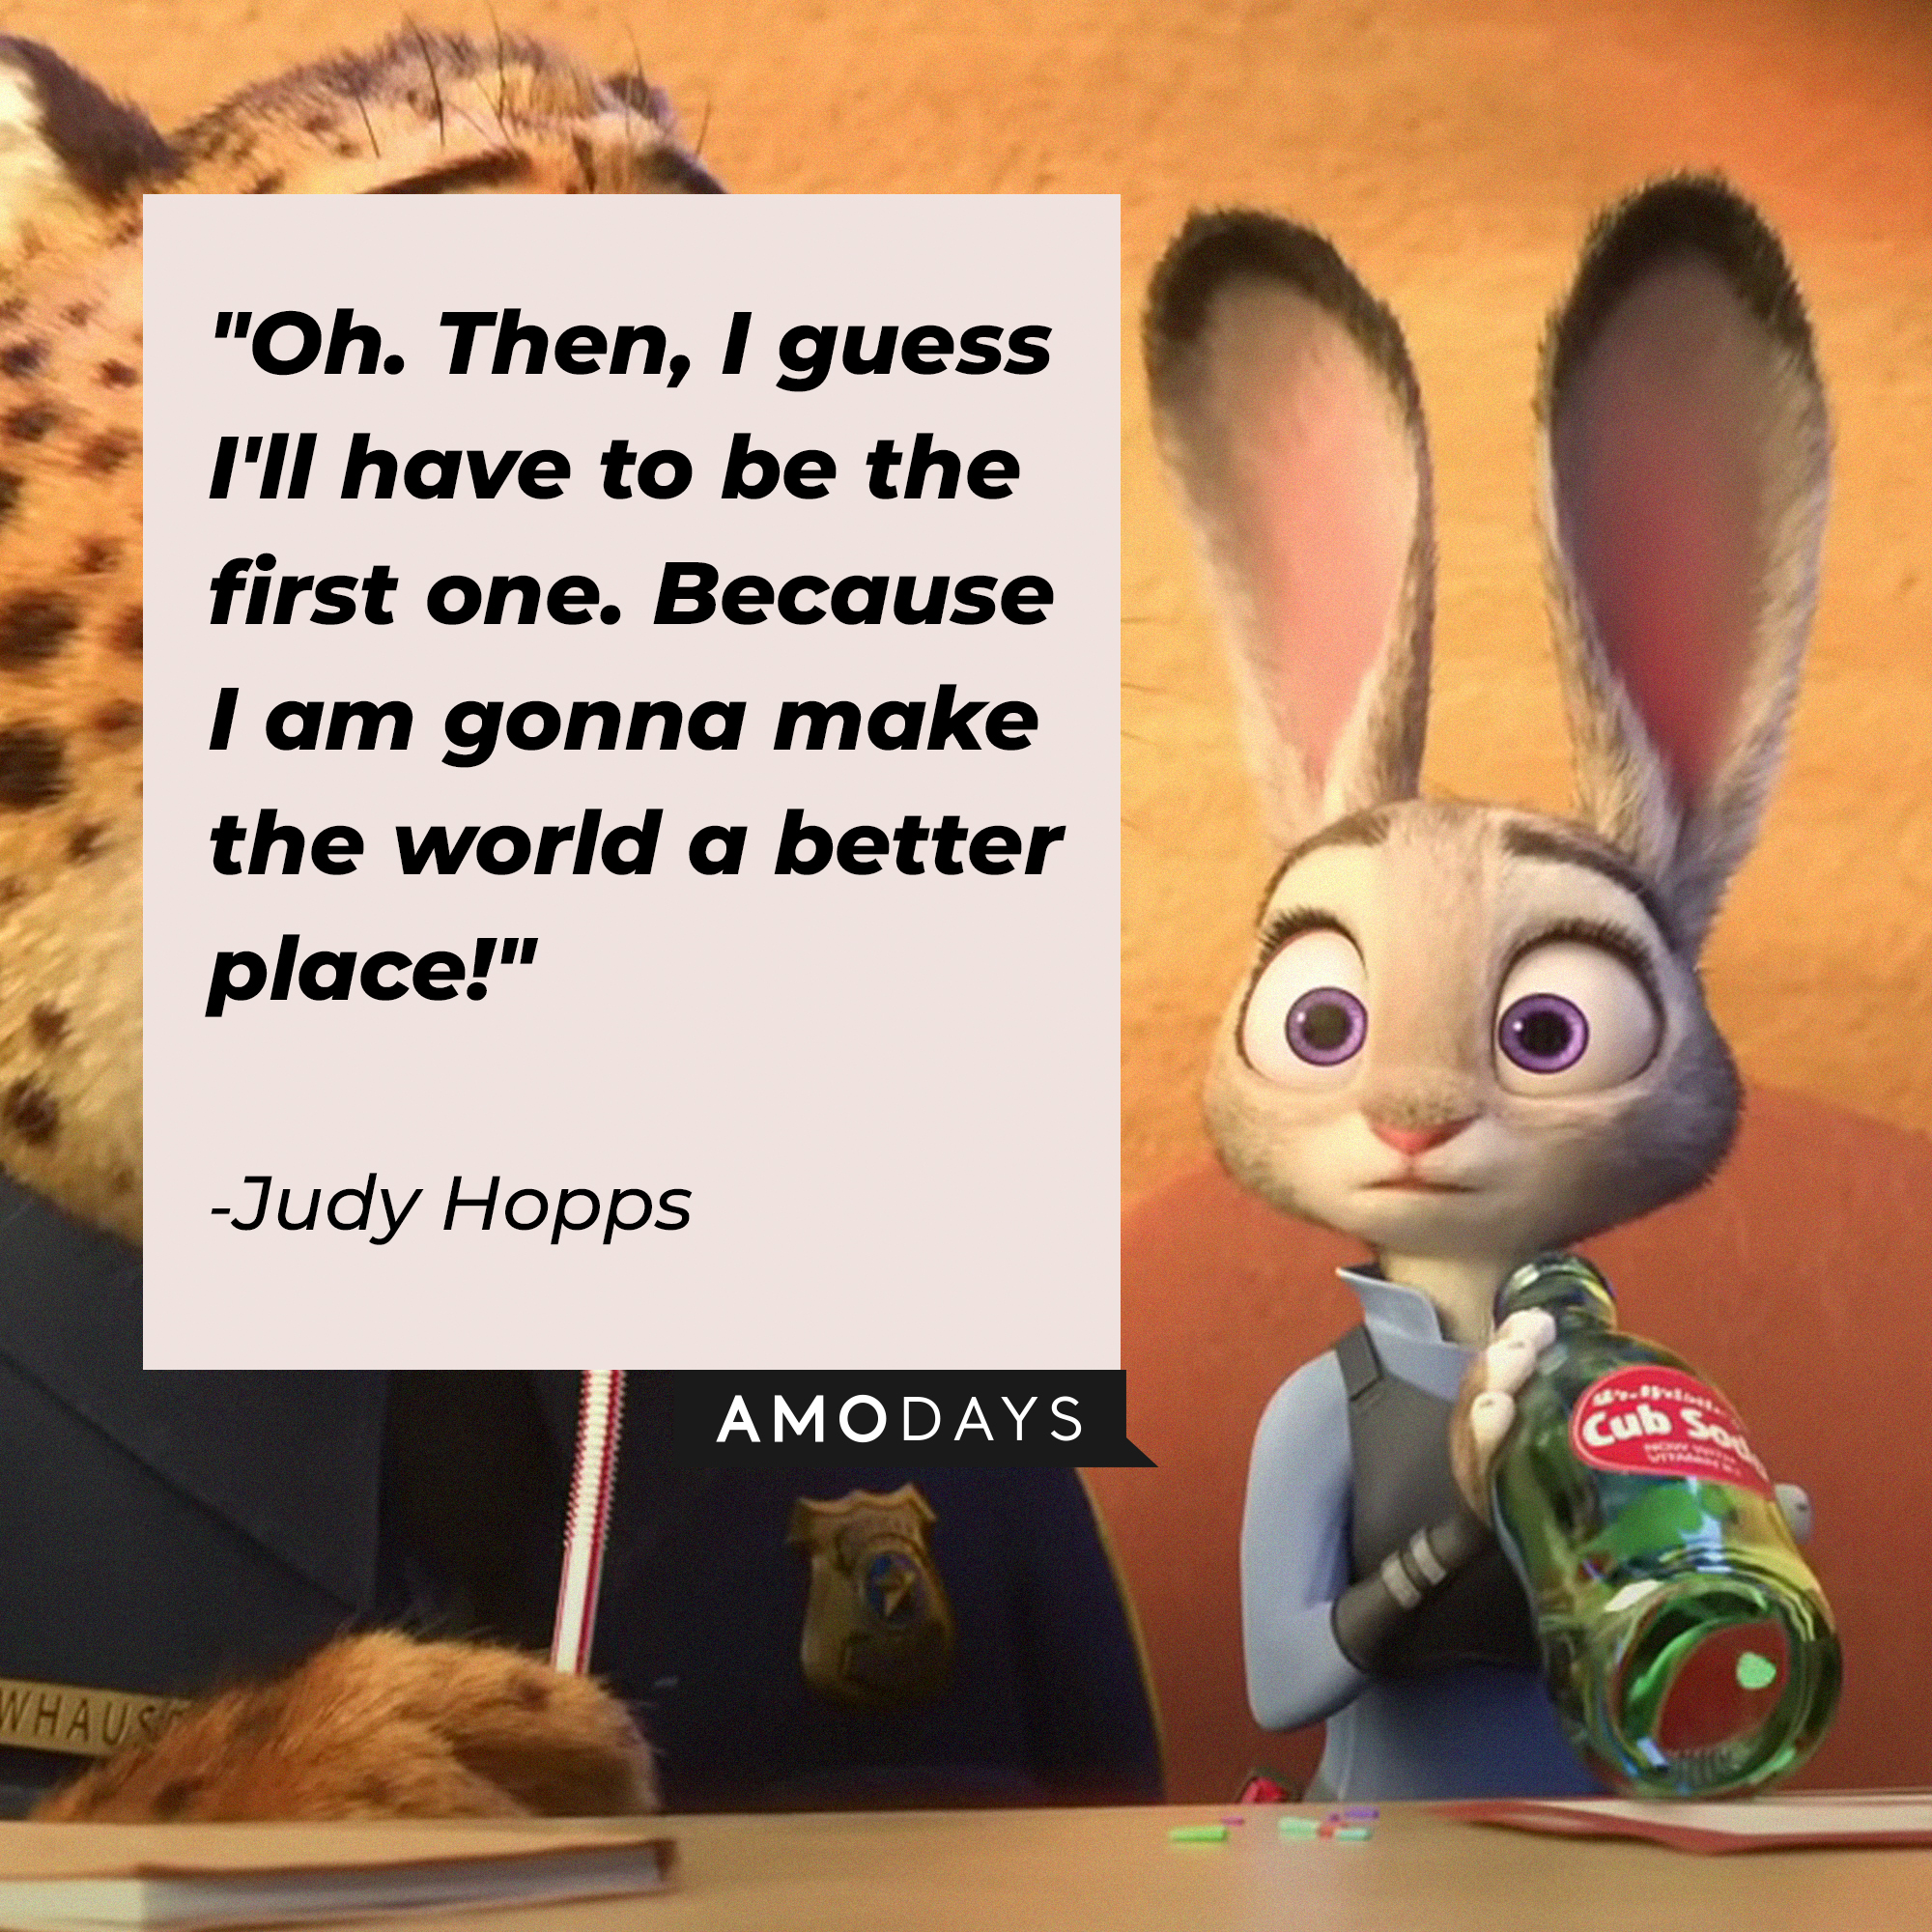 Jody Hopps' quote: "Oh. Then, I guess I'll have to be the first one. Because I am gonna make the world a better place!" | Source: facebook.com/DisneyZootopia